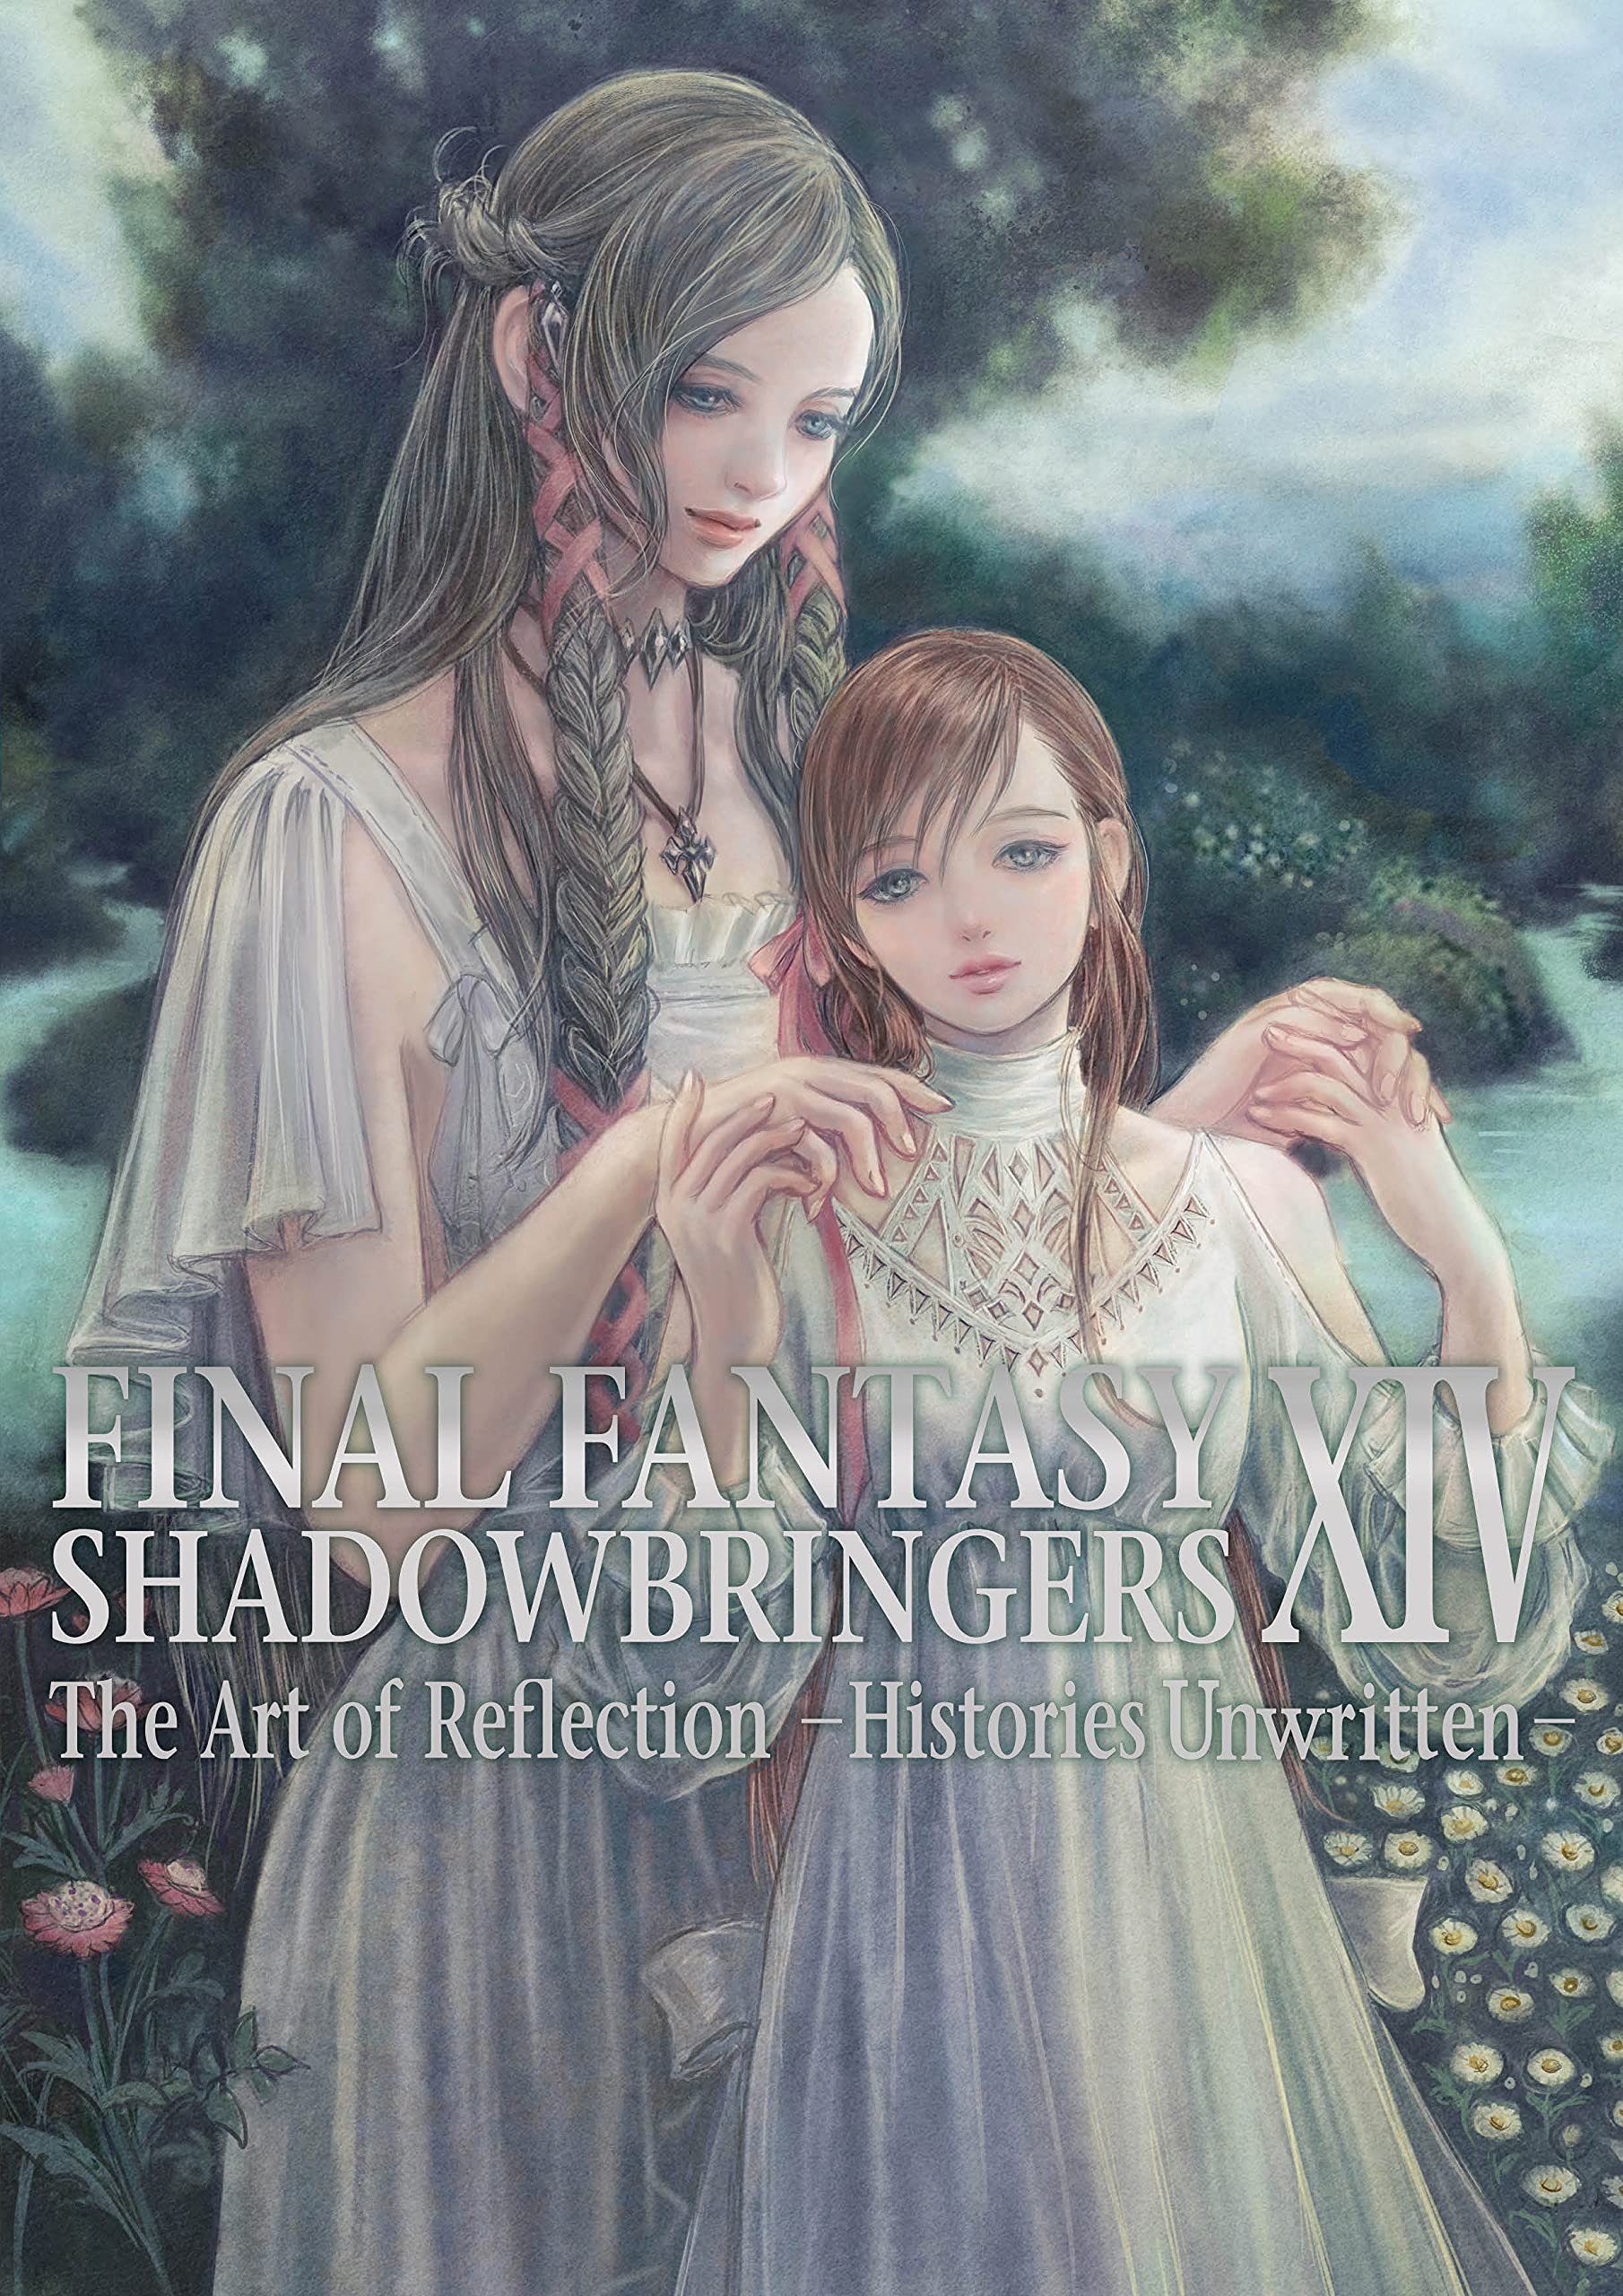 Final Fantasy XIV: Shadowbringers - The Art of Reflection - Histories Unwritten